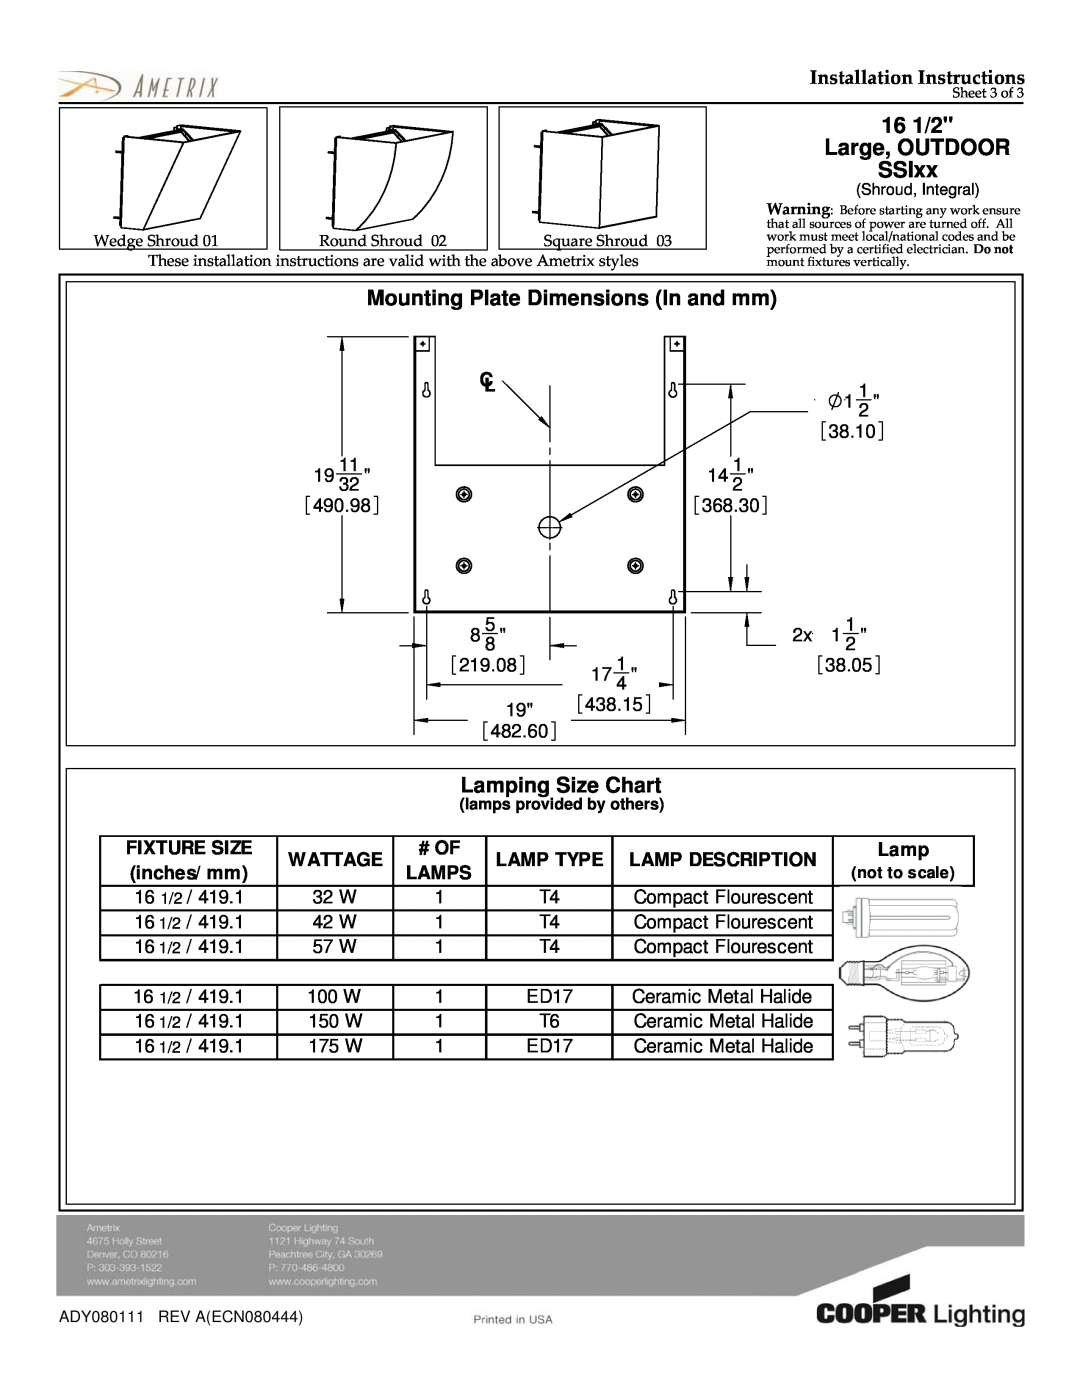 Cooper Lighting 340 161/2 Large, OUTDOOR SSIxx, Mounting Plate Dimensions In and mm, Lamping Size Chart, Fixture Size 